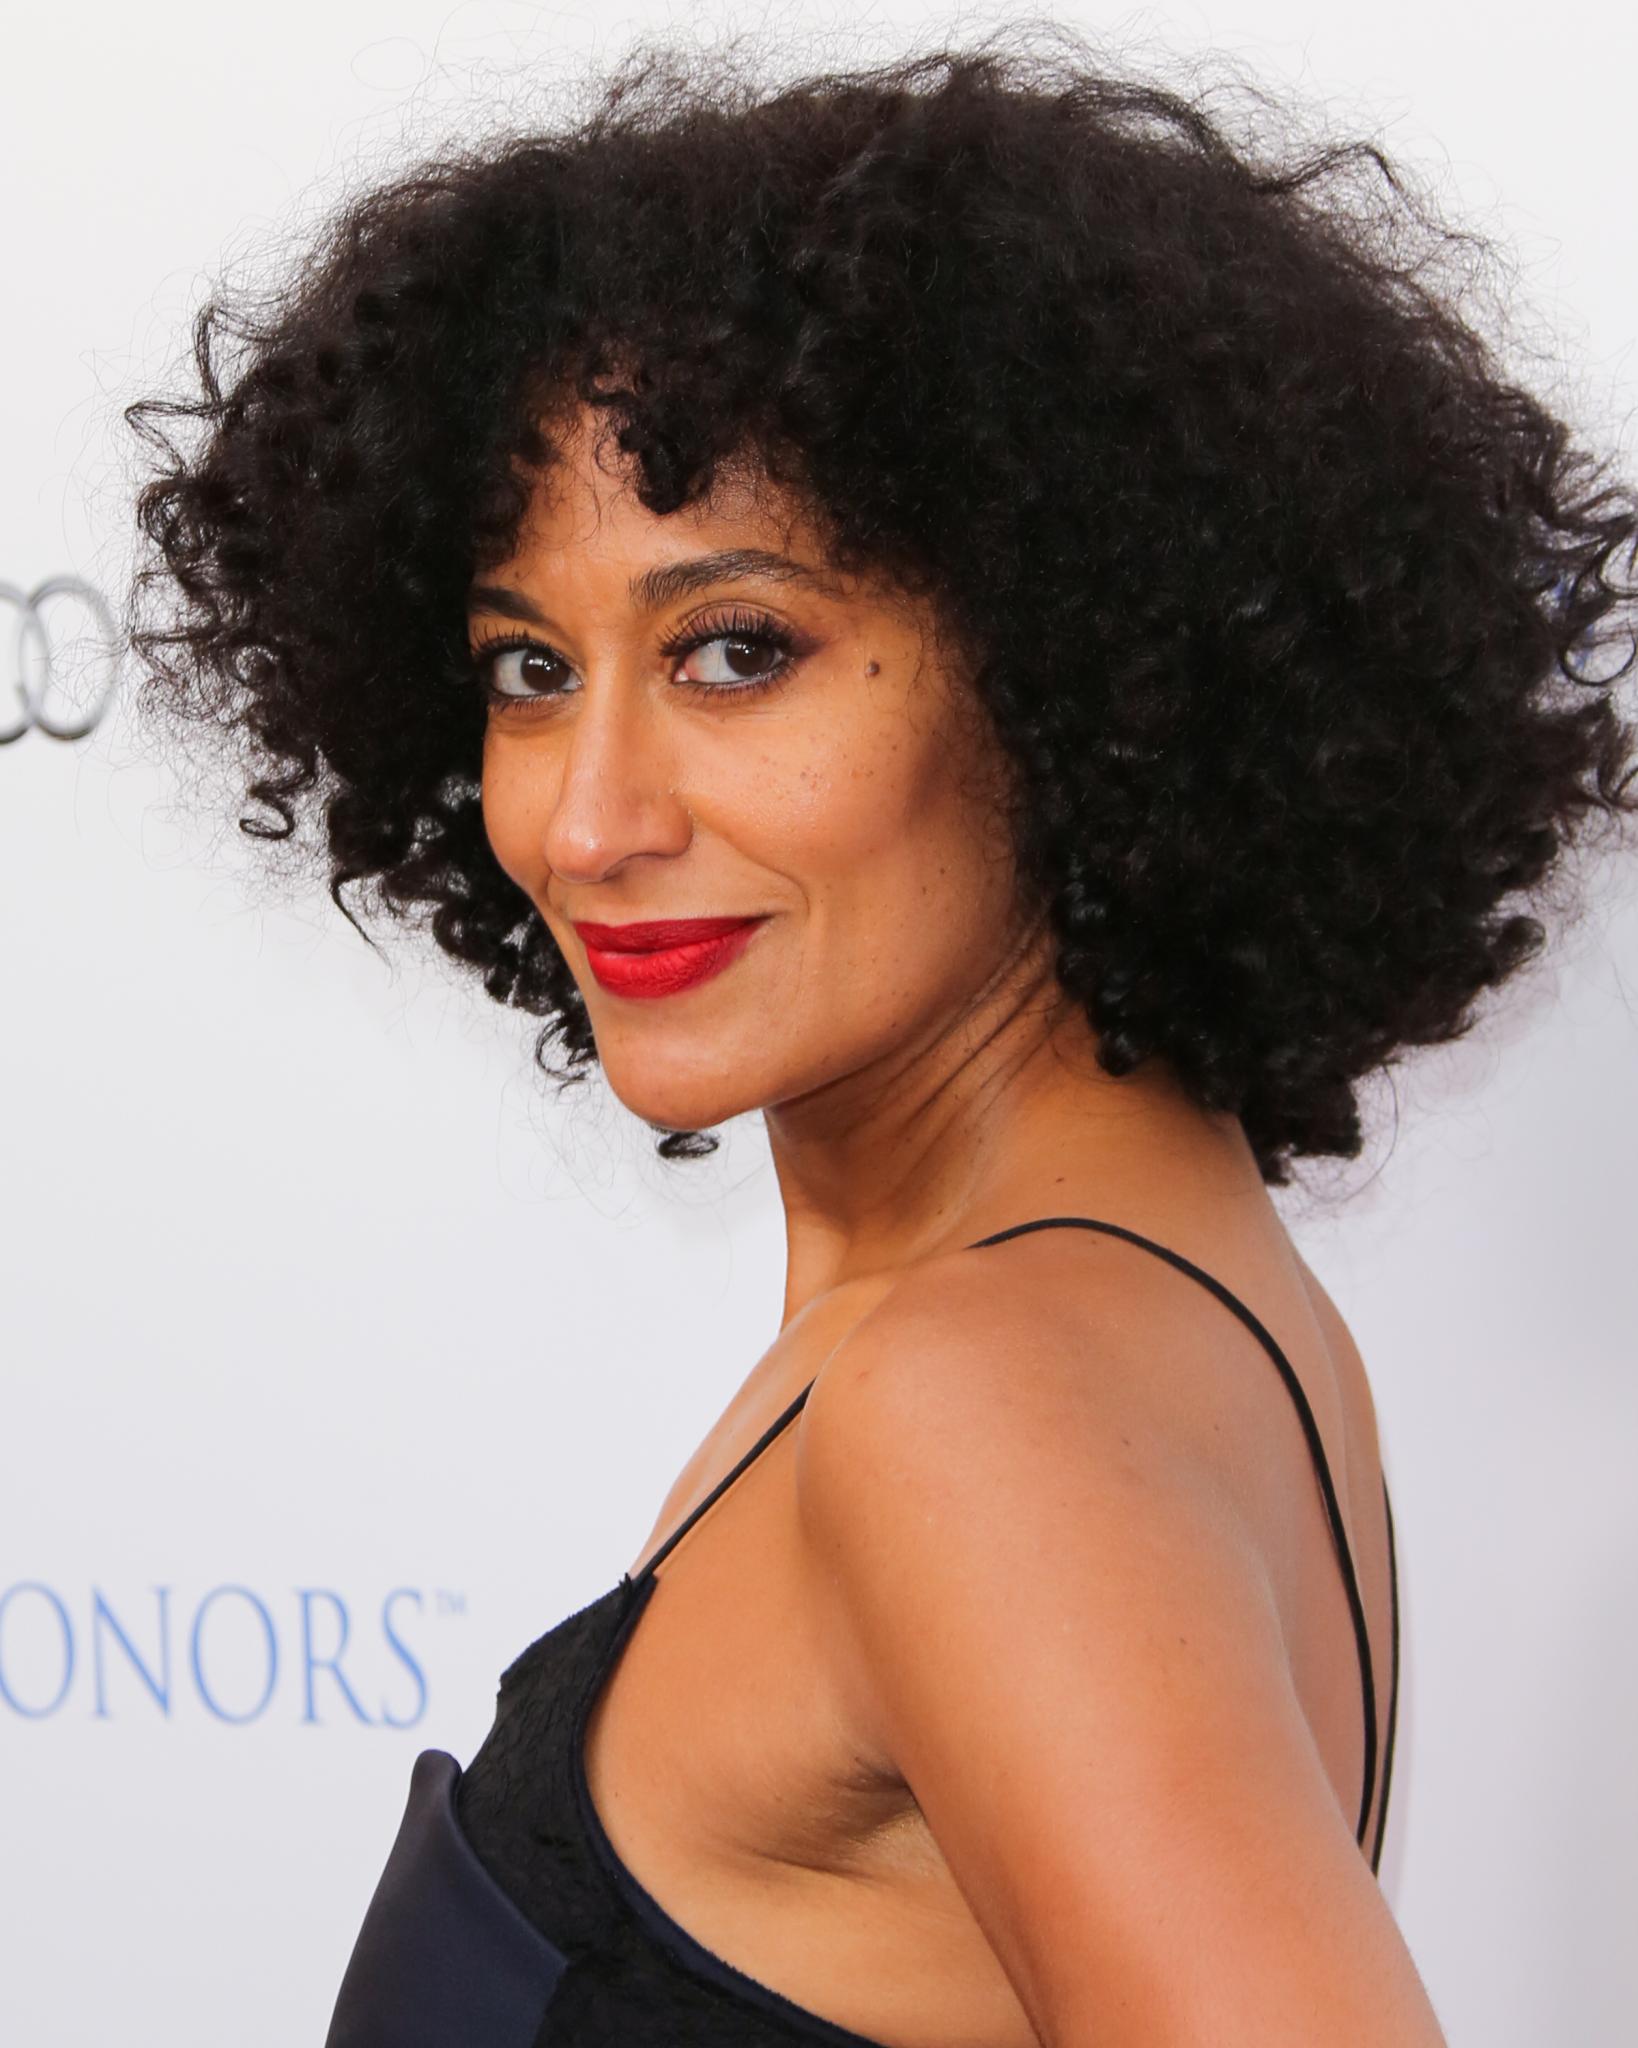 How Tracee Ellis Ross Is Getting Ready to Co-Host the BET Awards
